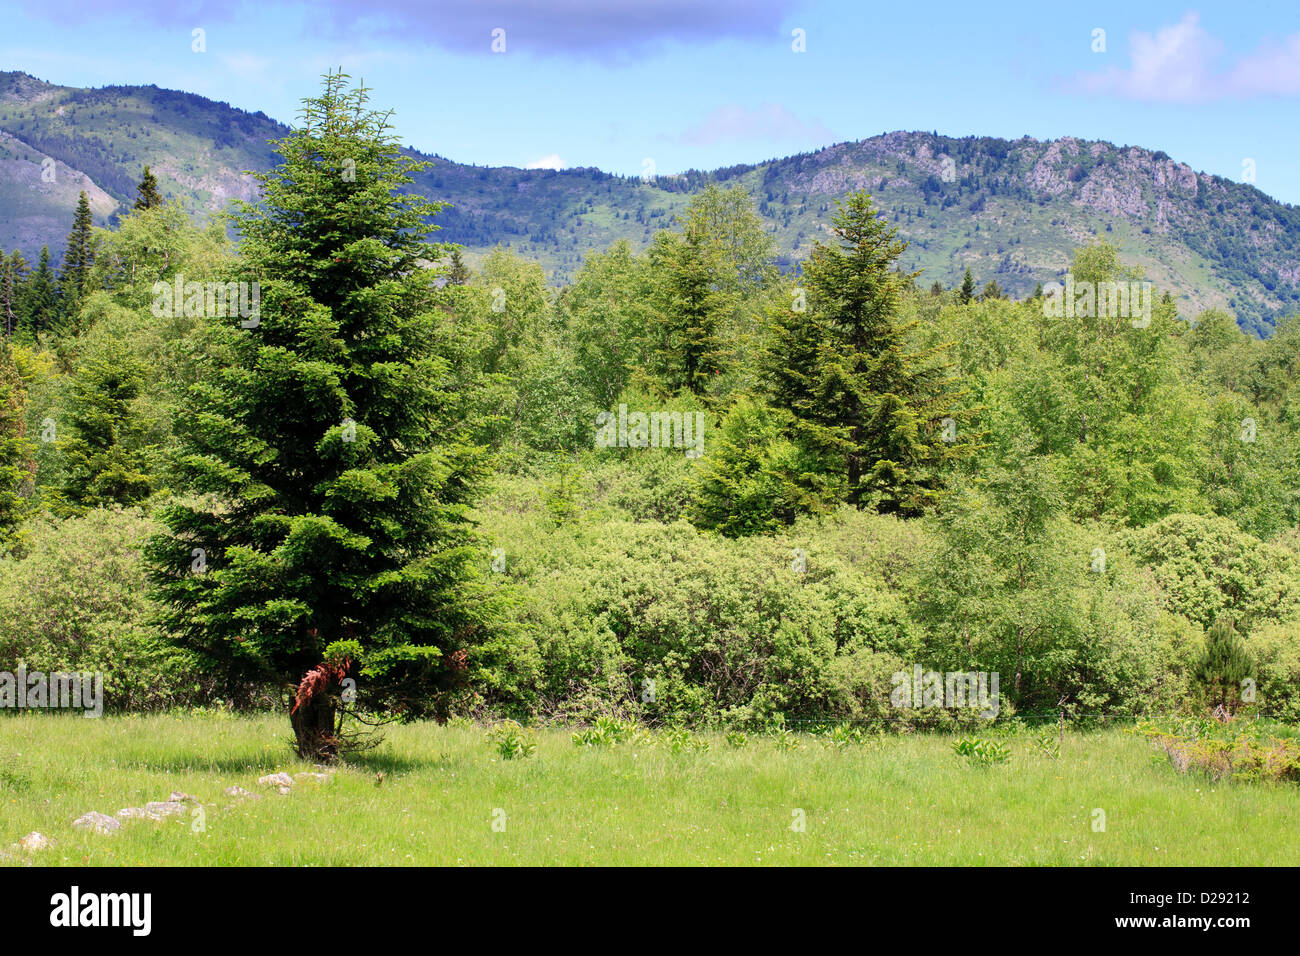 Habitat - Wet meadow in a forest in the Pyrenees, Aude, France. June. Stock Photo